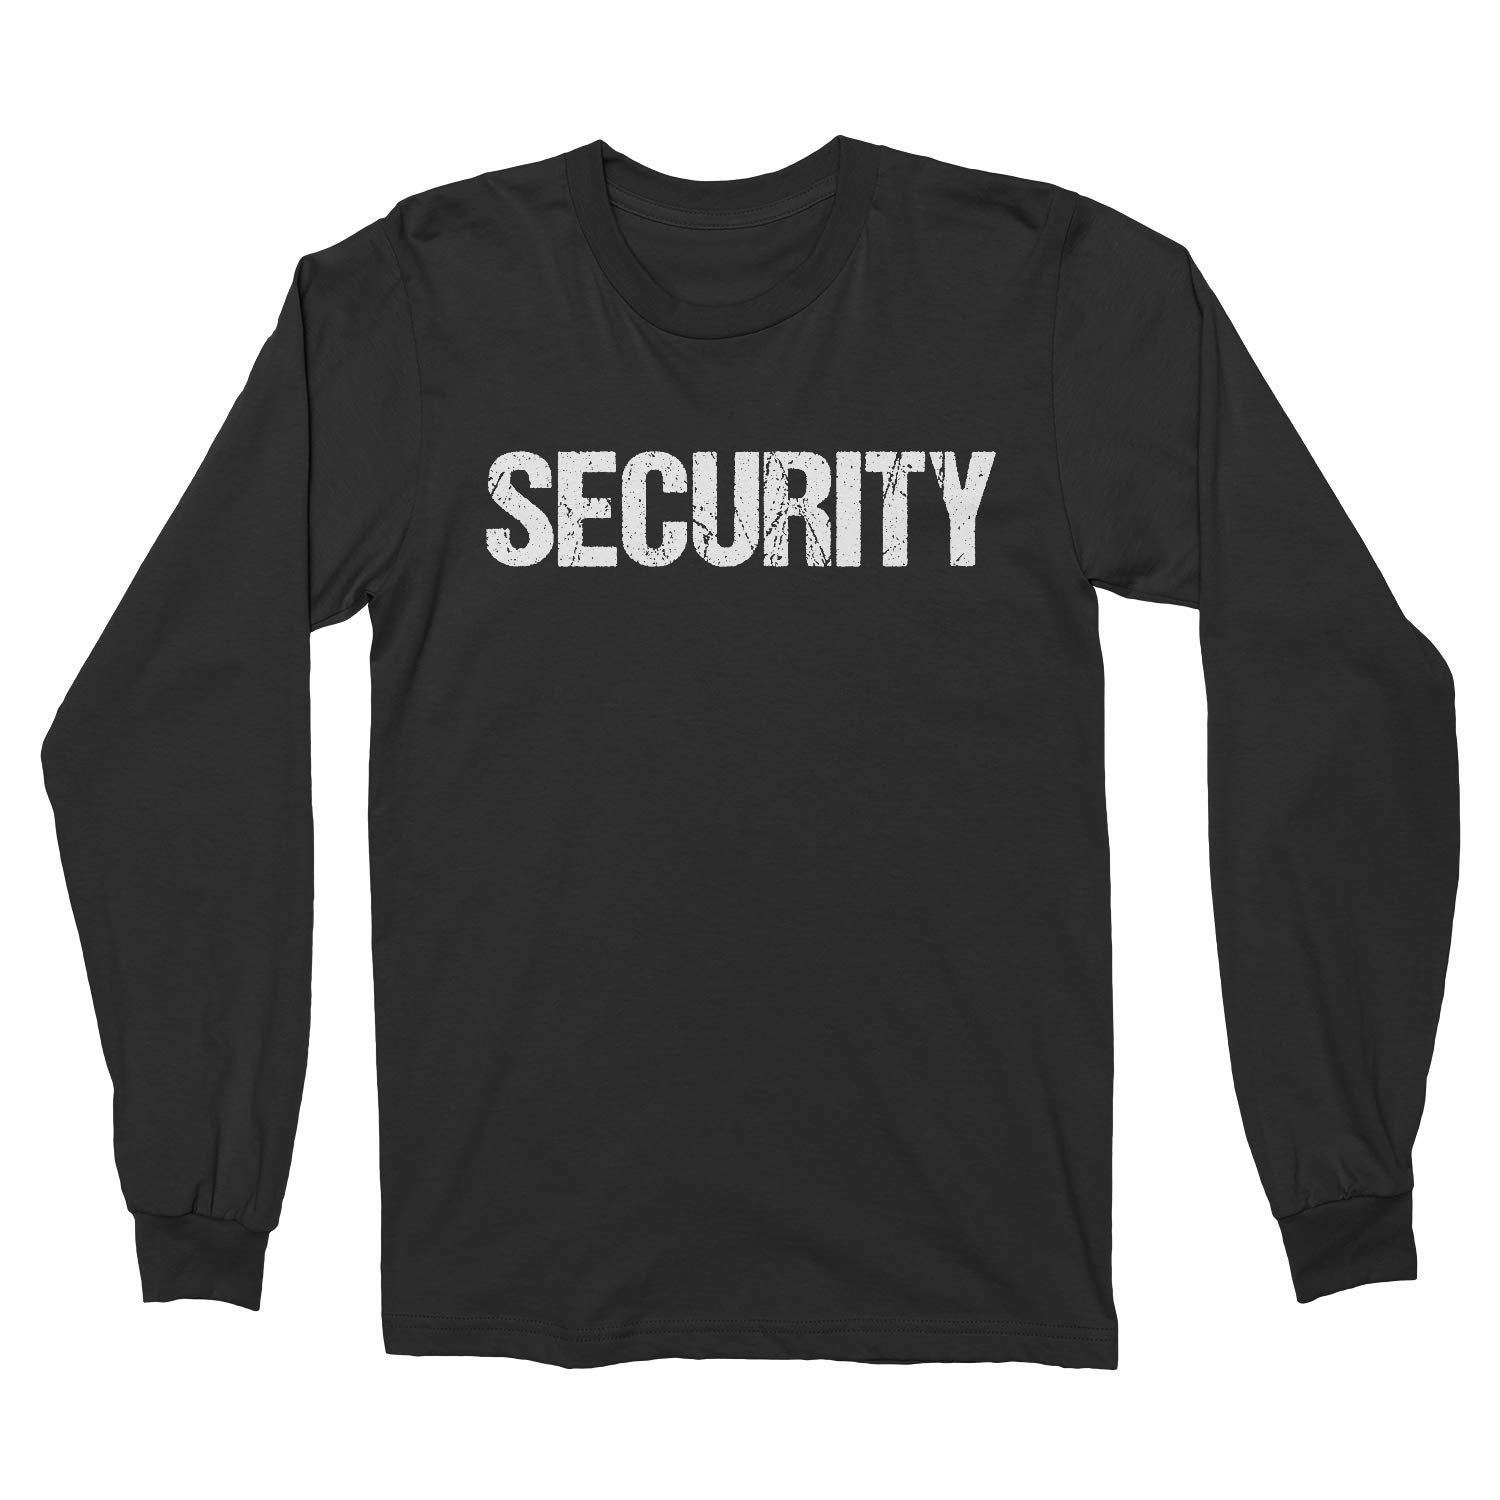 NYC FACTORY Long Sleeve Security T-Shirt Black & White Mens | Etsy